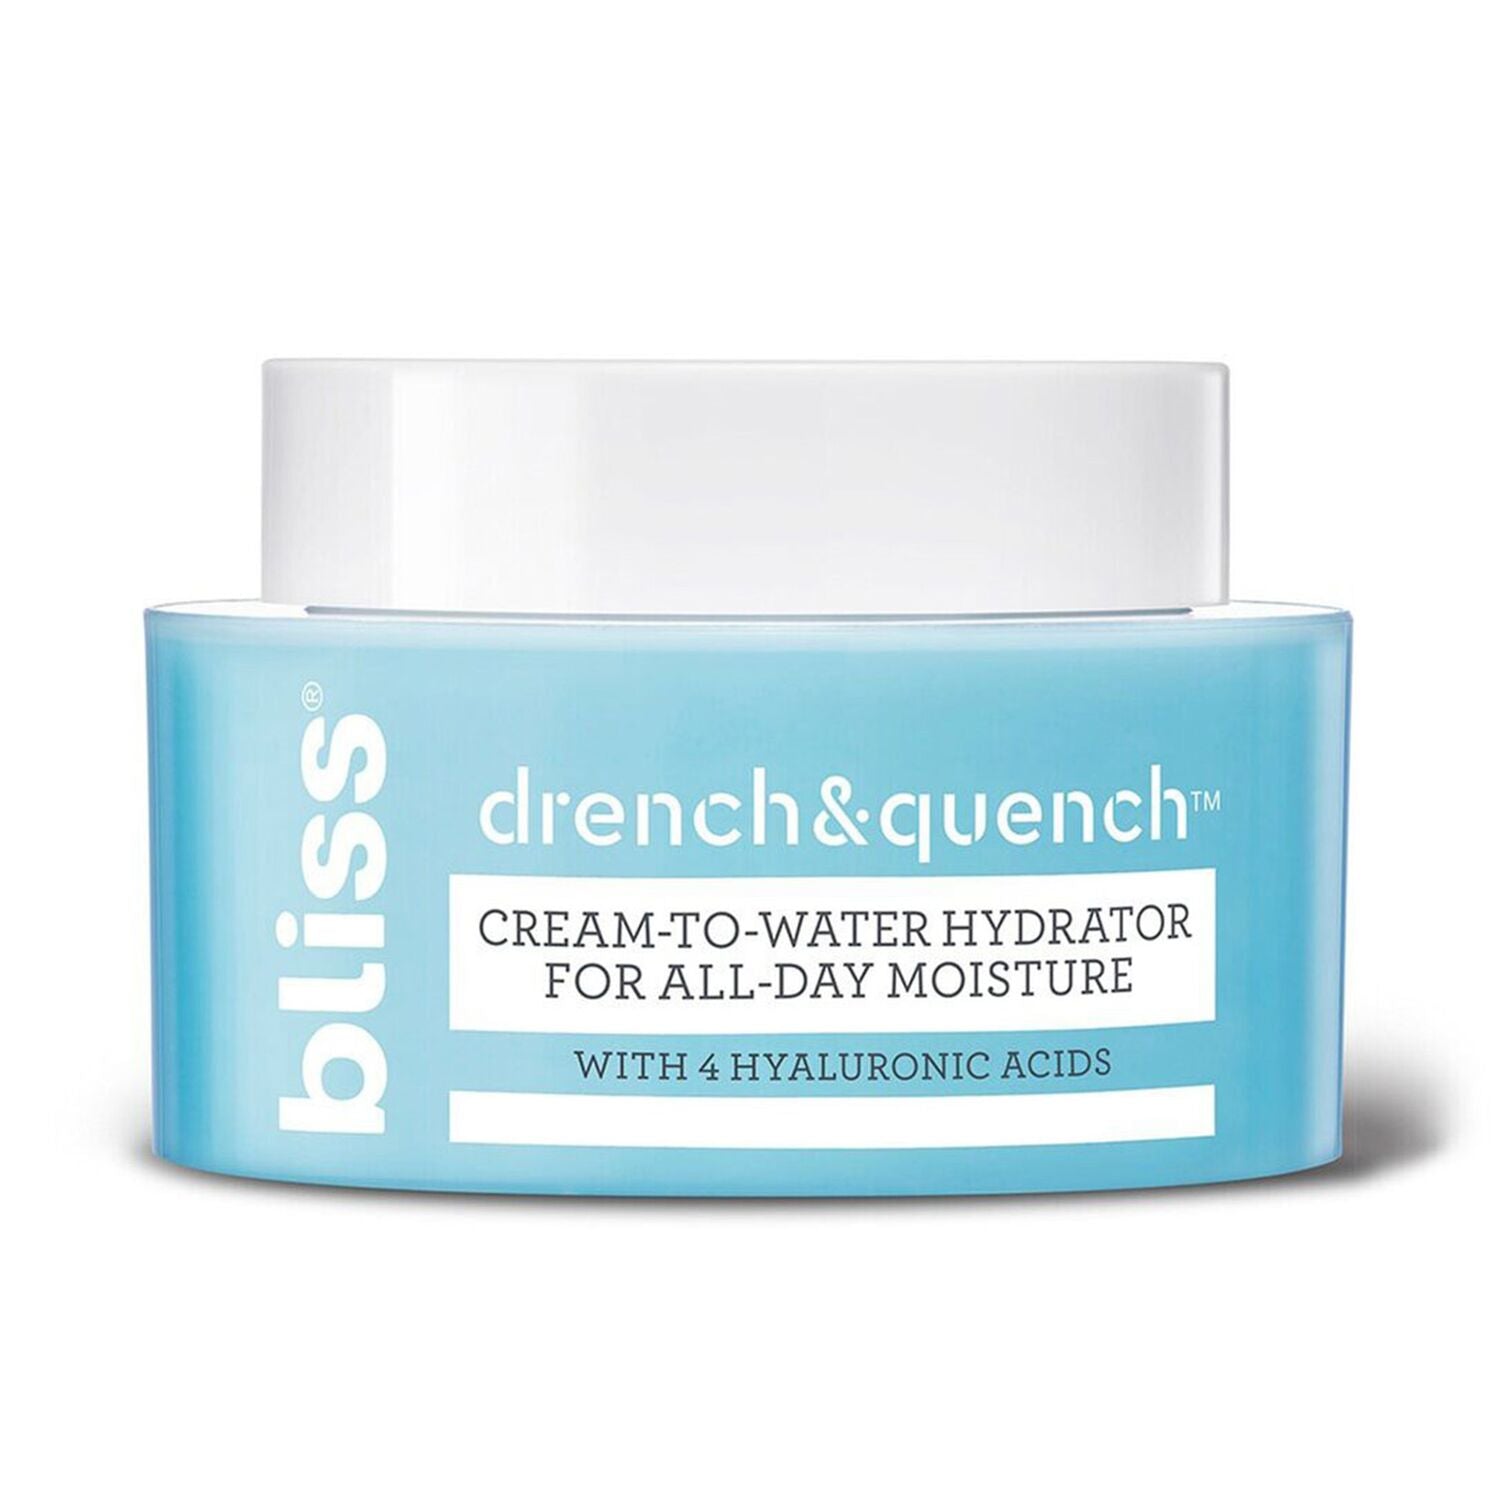 Drench & Quench All-Day Moisturizer